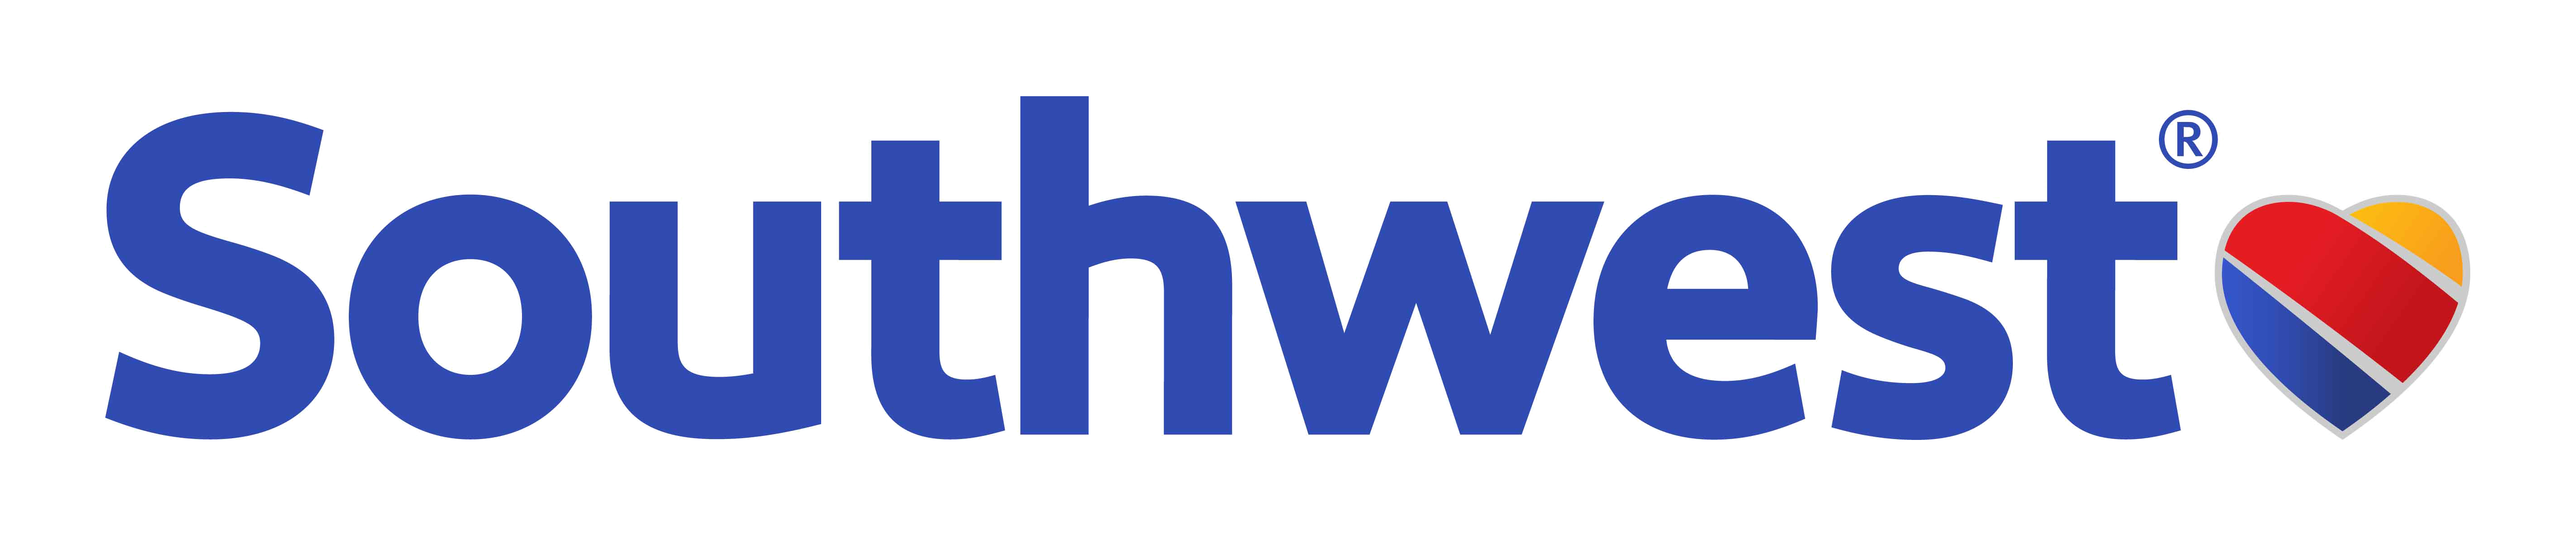 Download Southwest Airlines Logo PNG Image For Free